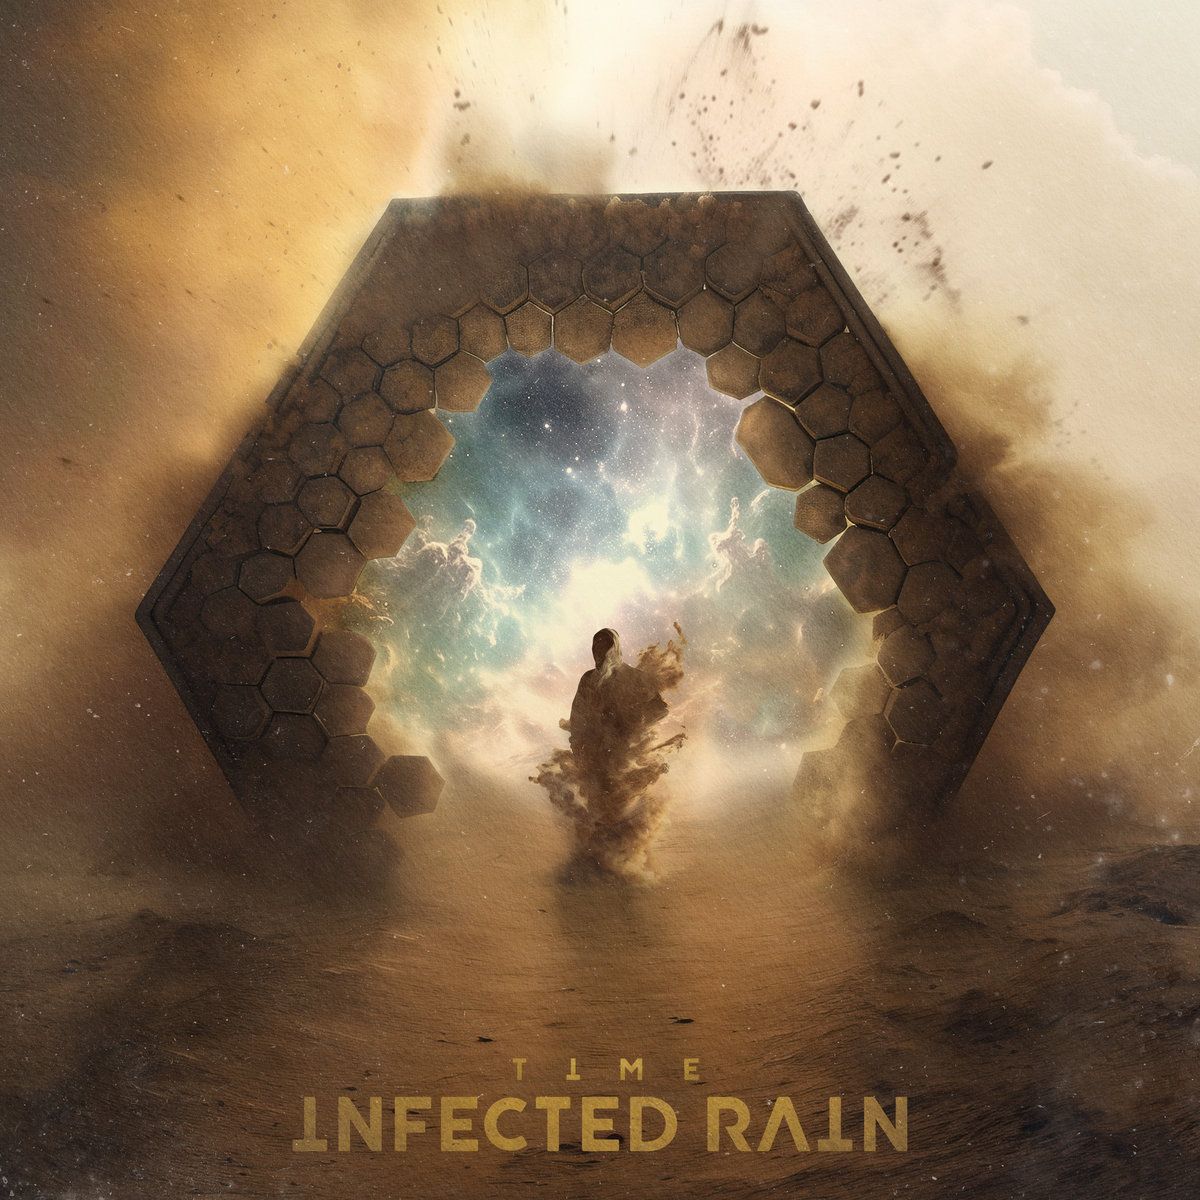 ALBUM REVIEW: Time by Infected Rain